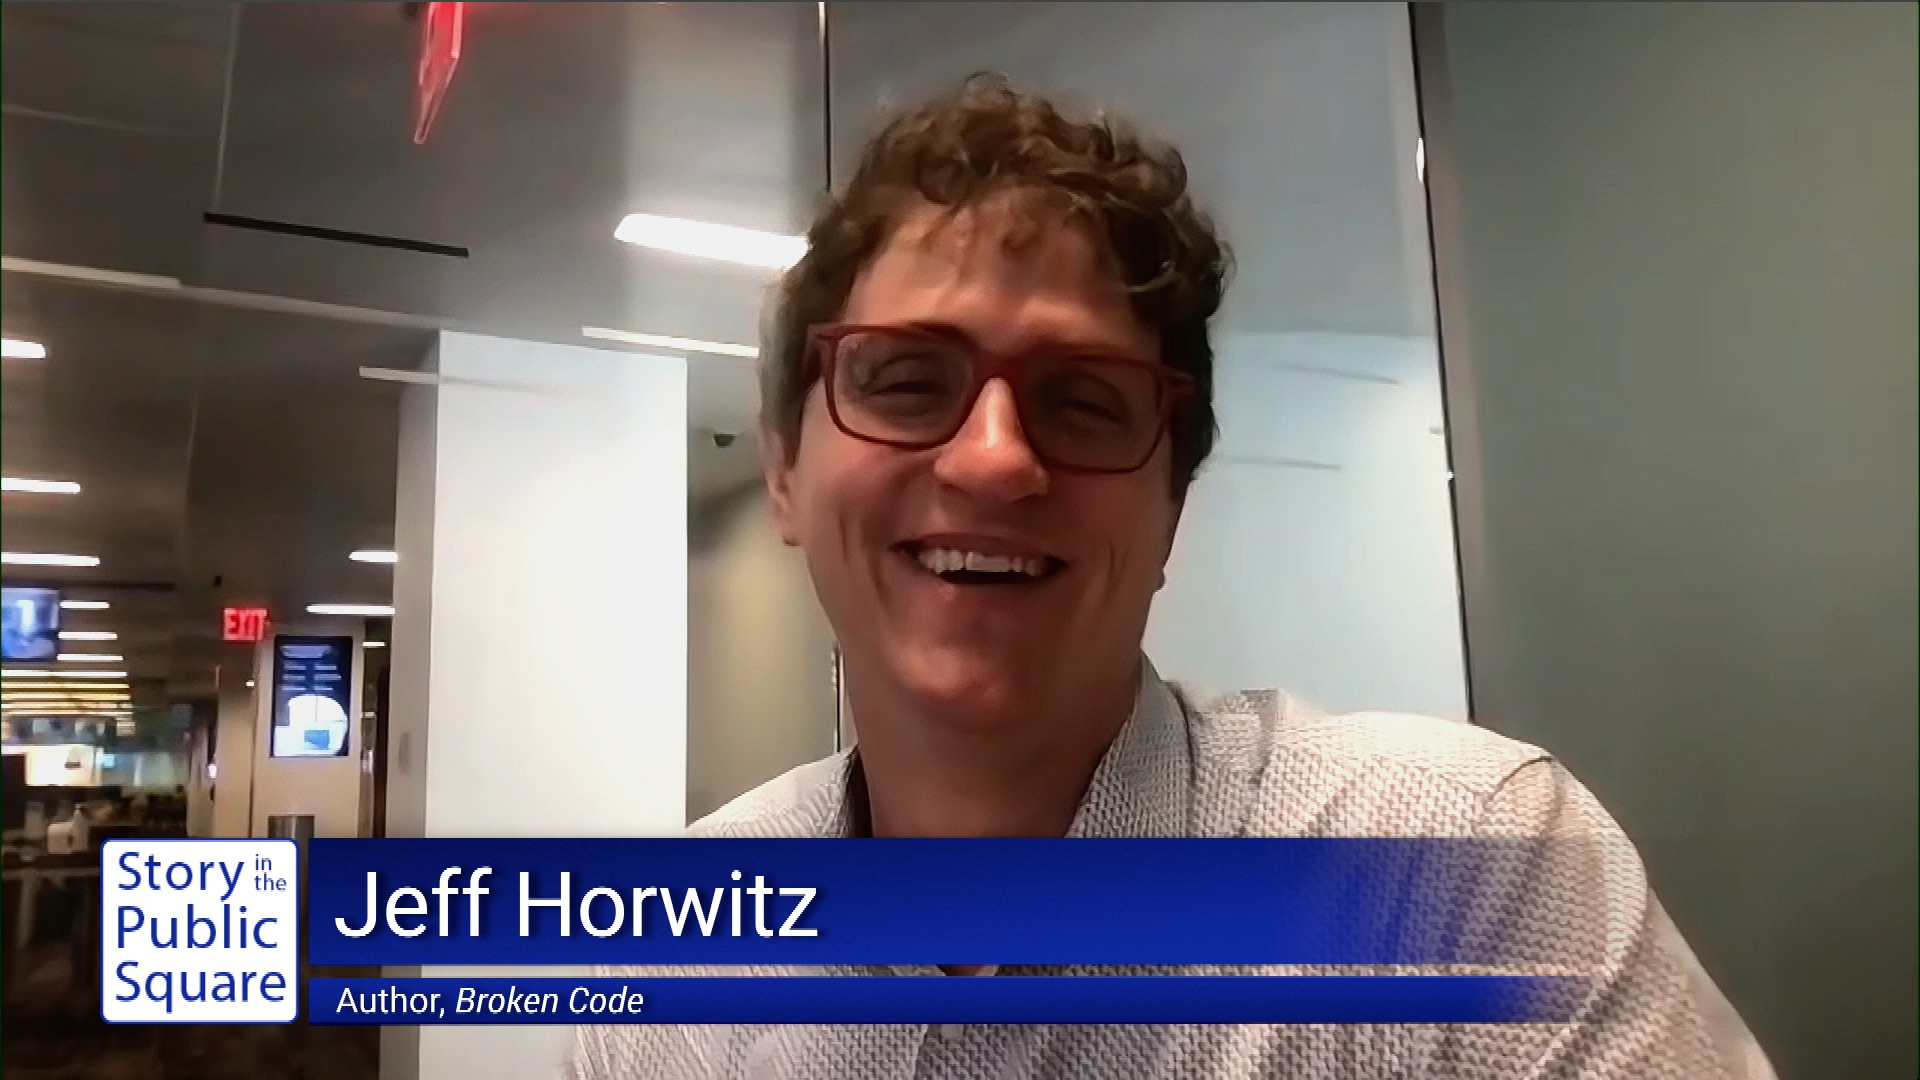 The Twisted Journey from Facebooks Origins to "Broken Code" with Jeff Horwitz